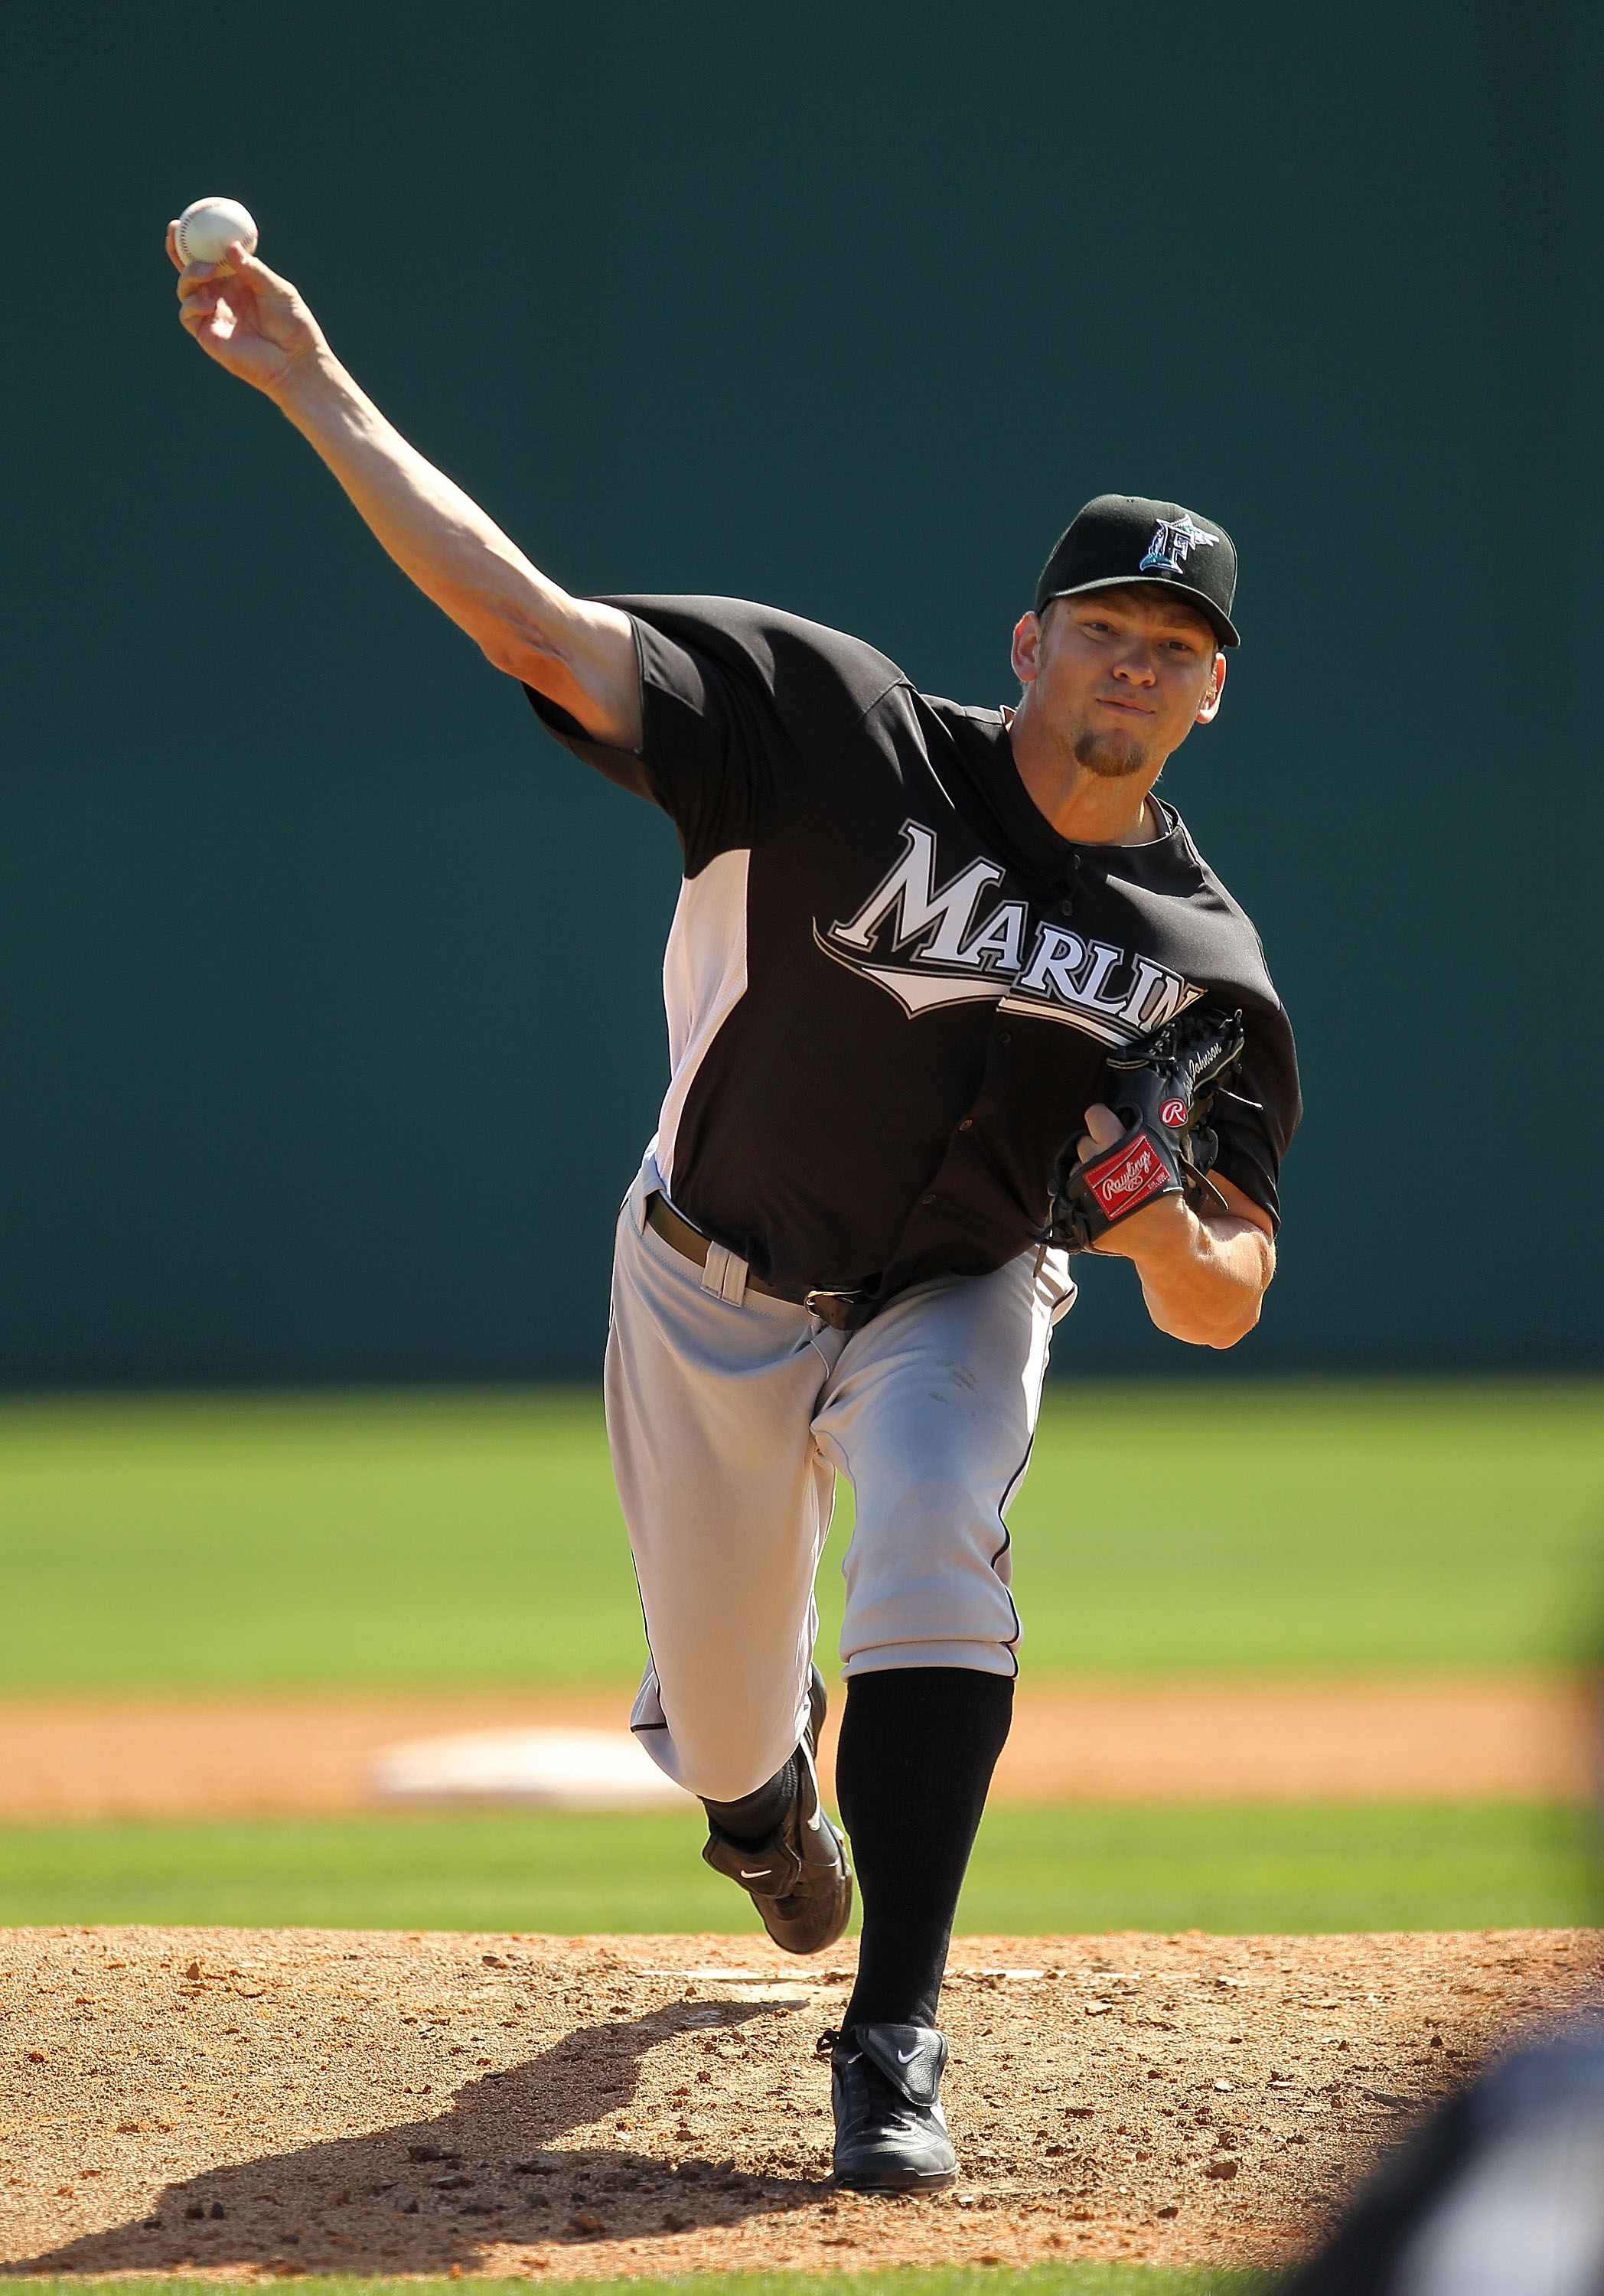 VIERA, FL - MARCH 02:  Josh Johnson #55  of the Florida Marlins pitches during a Spring Training game against the Washington Nationals at Space Coast Stadium on March 2, 2011 in Viera, Florida.  (Photo by Mike Ehrmann/Getty Images)